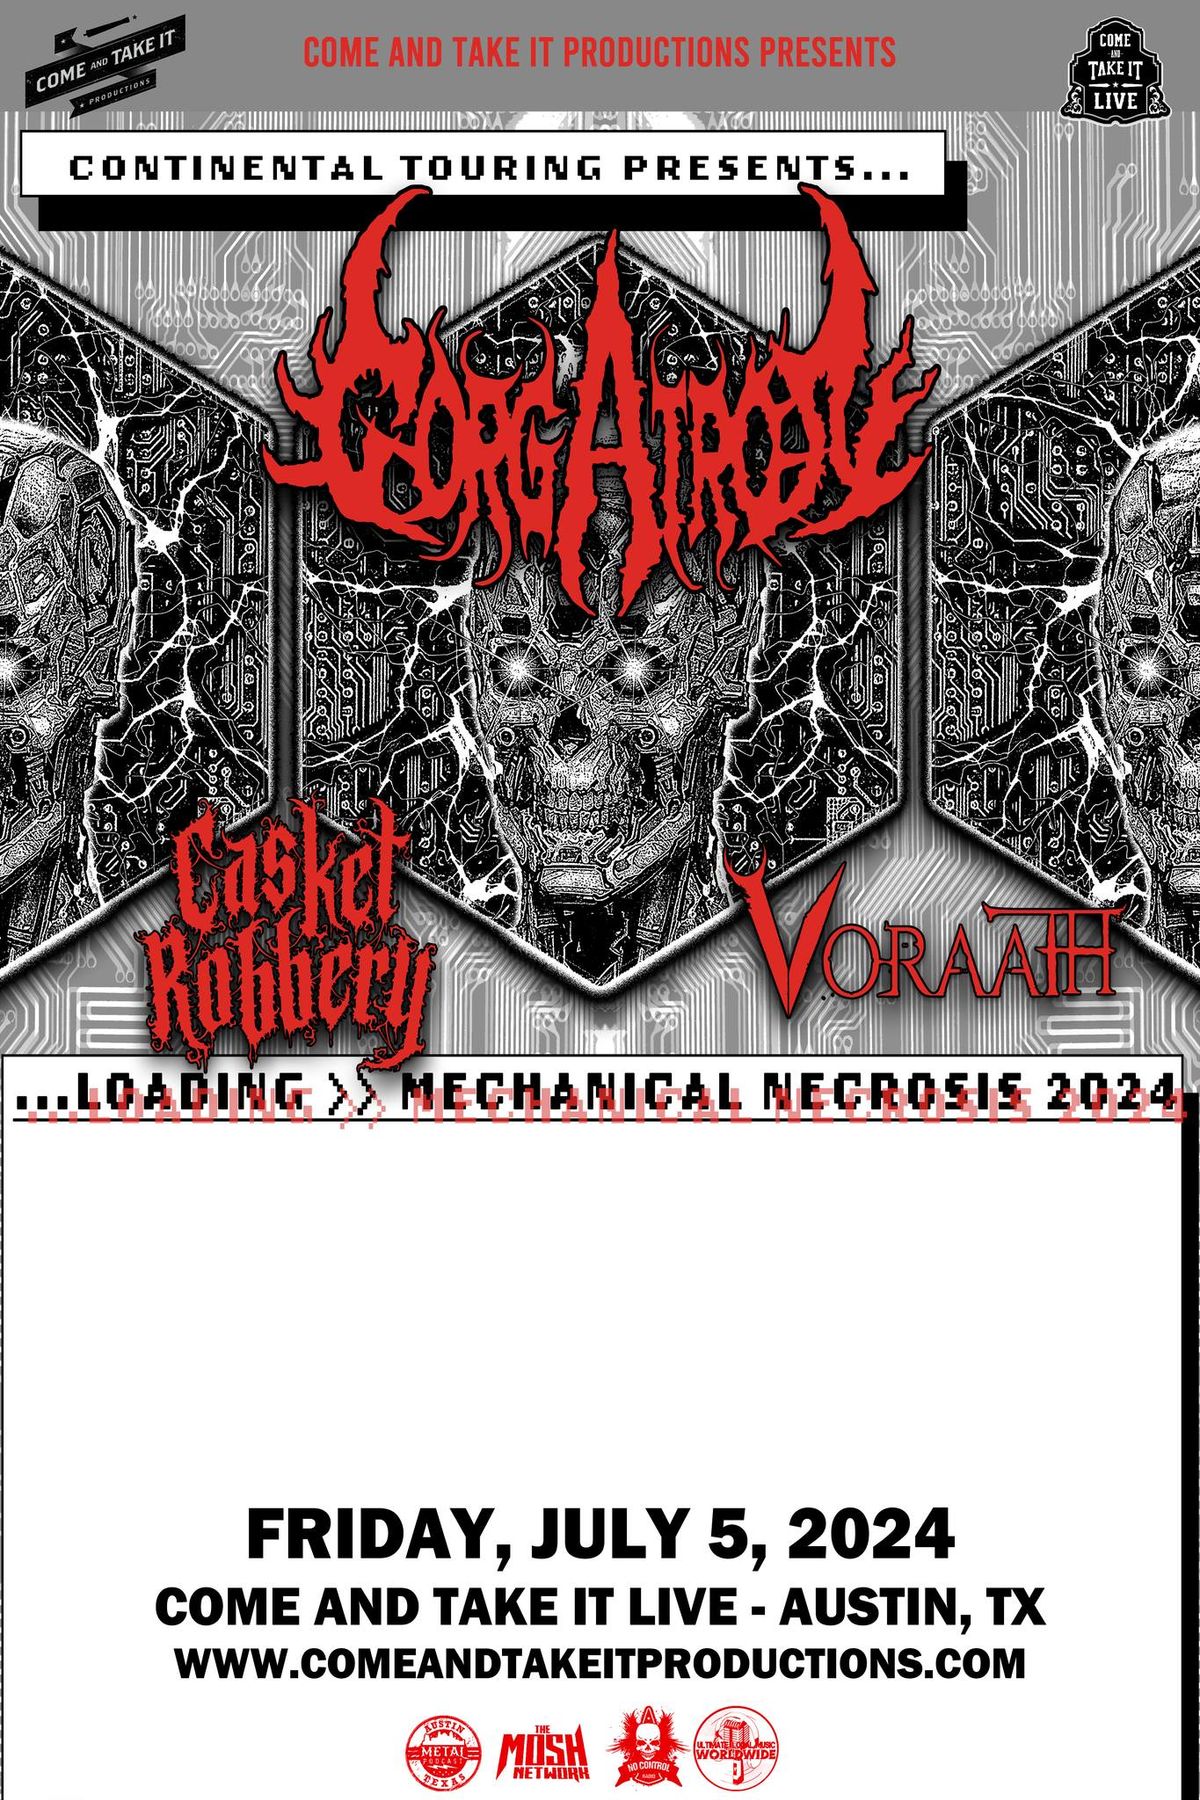 Gorgatron, Casket Robbery, and Voraath at Come and Take It Live!